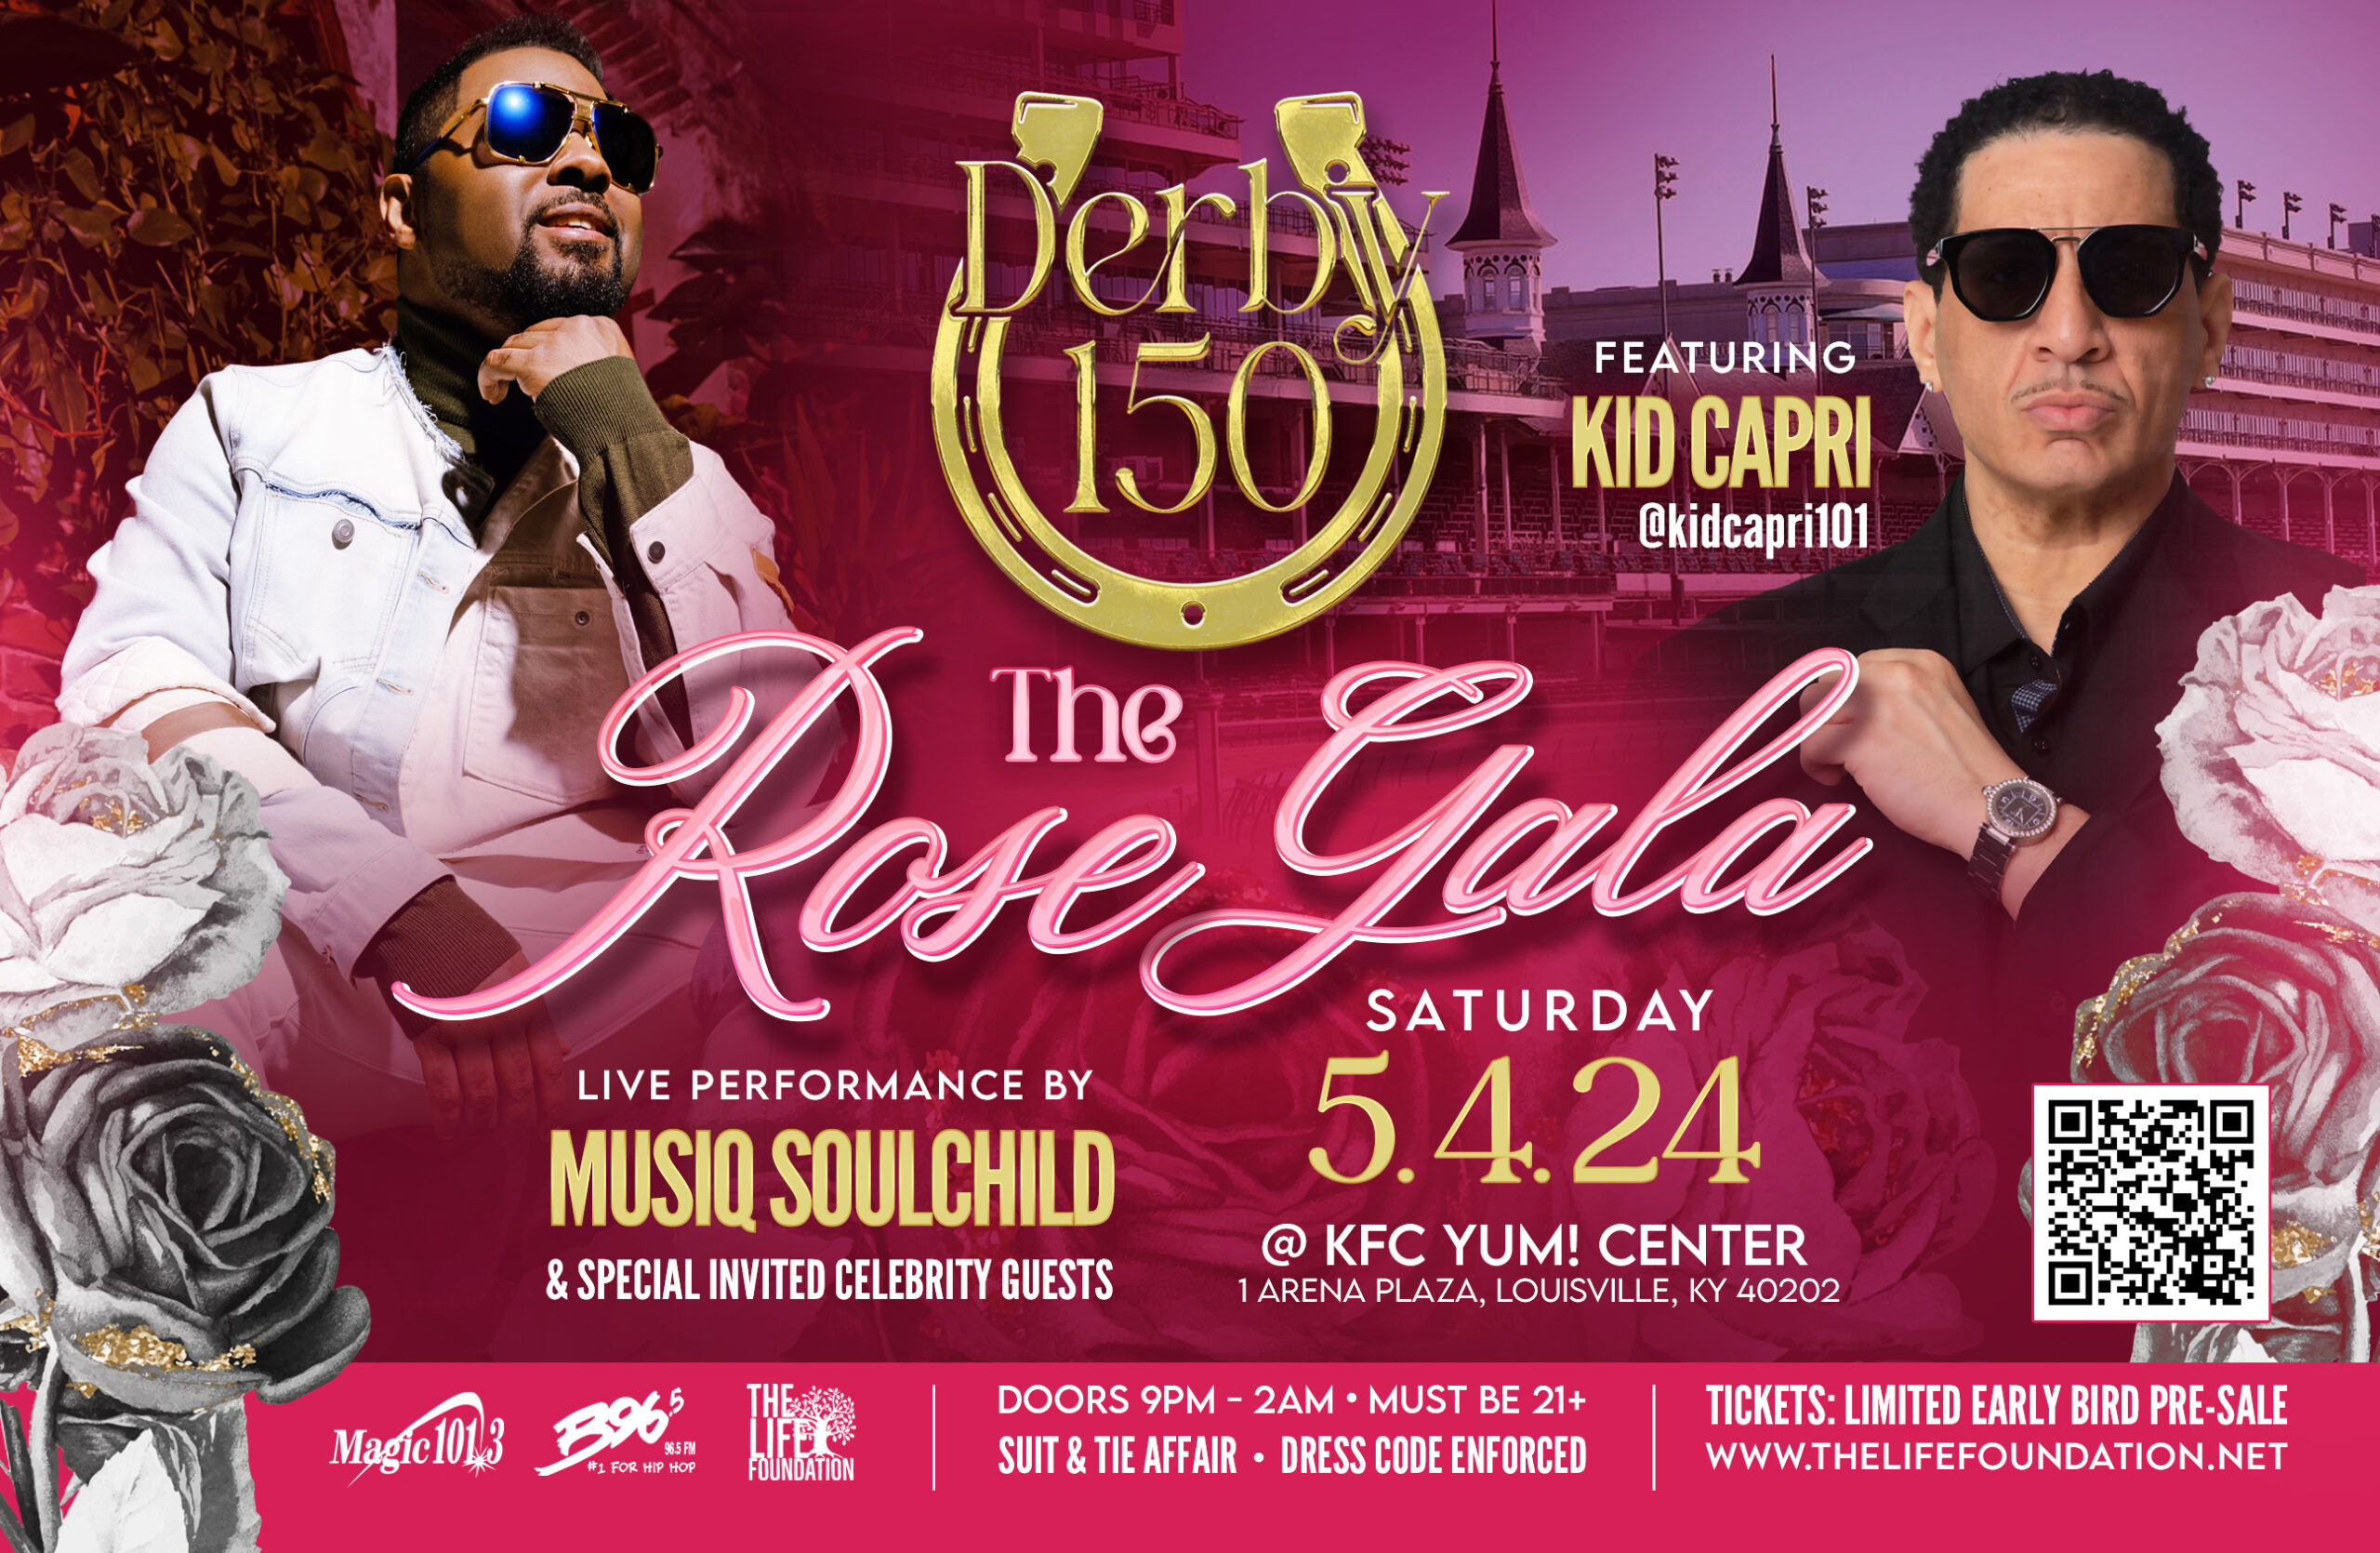 B96.5 & The Life Foundation Present Derby 150 The Rose Gala